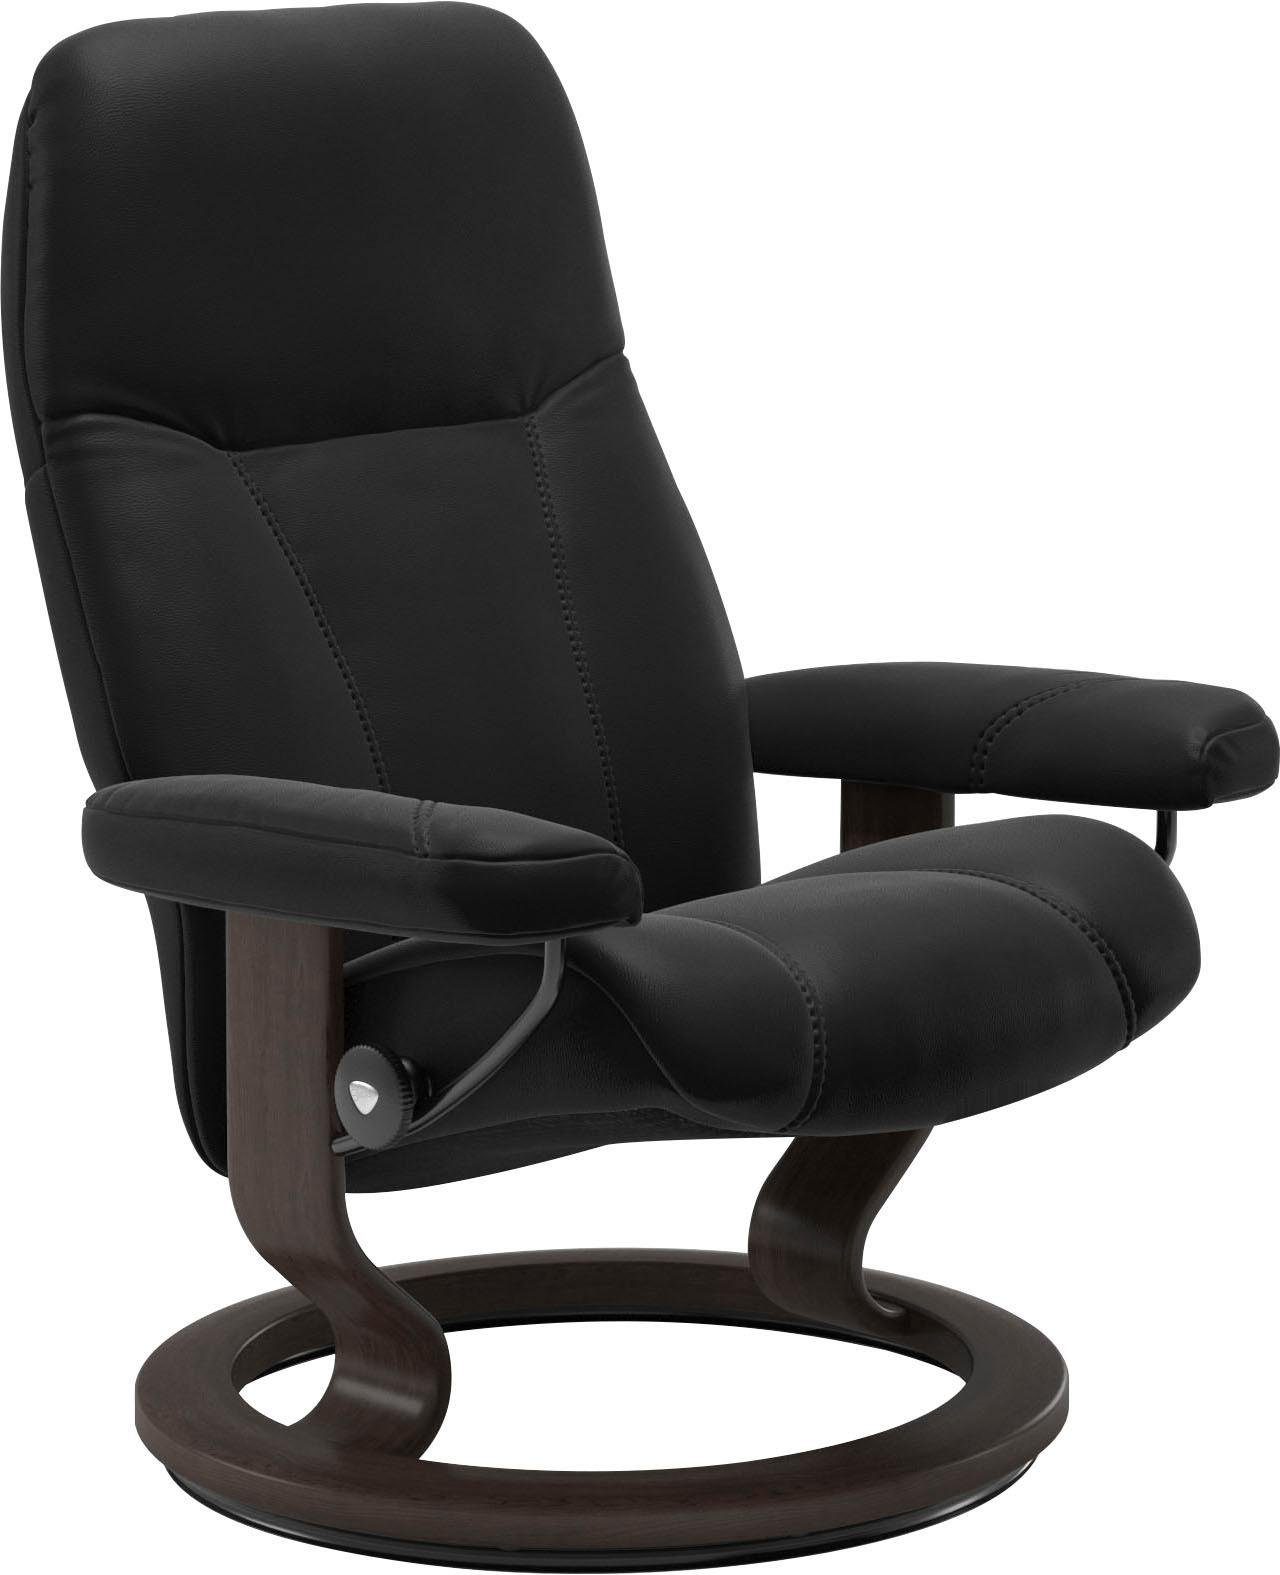 Stressless® Relaxsessel Consul, mit Classic Base, Größe M, Gestell Wenge | Funktionssessel